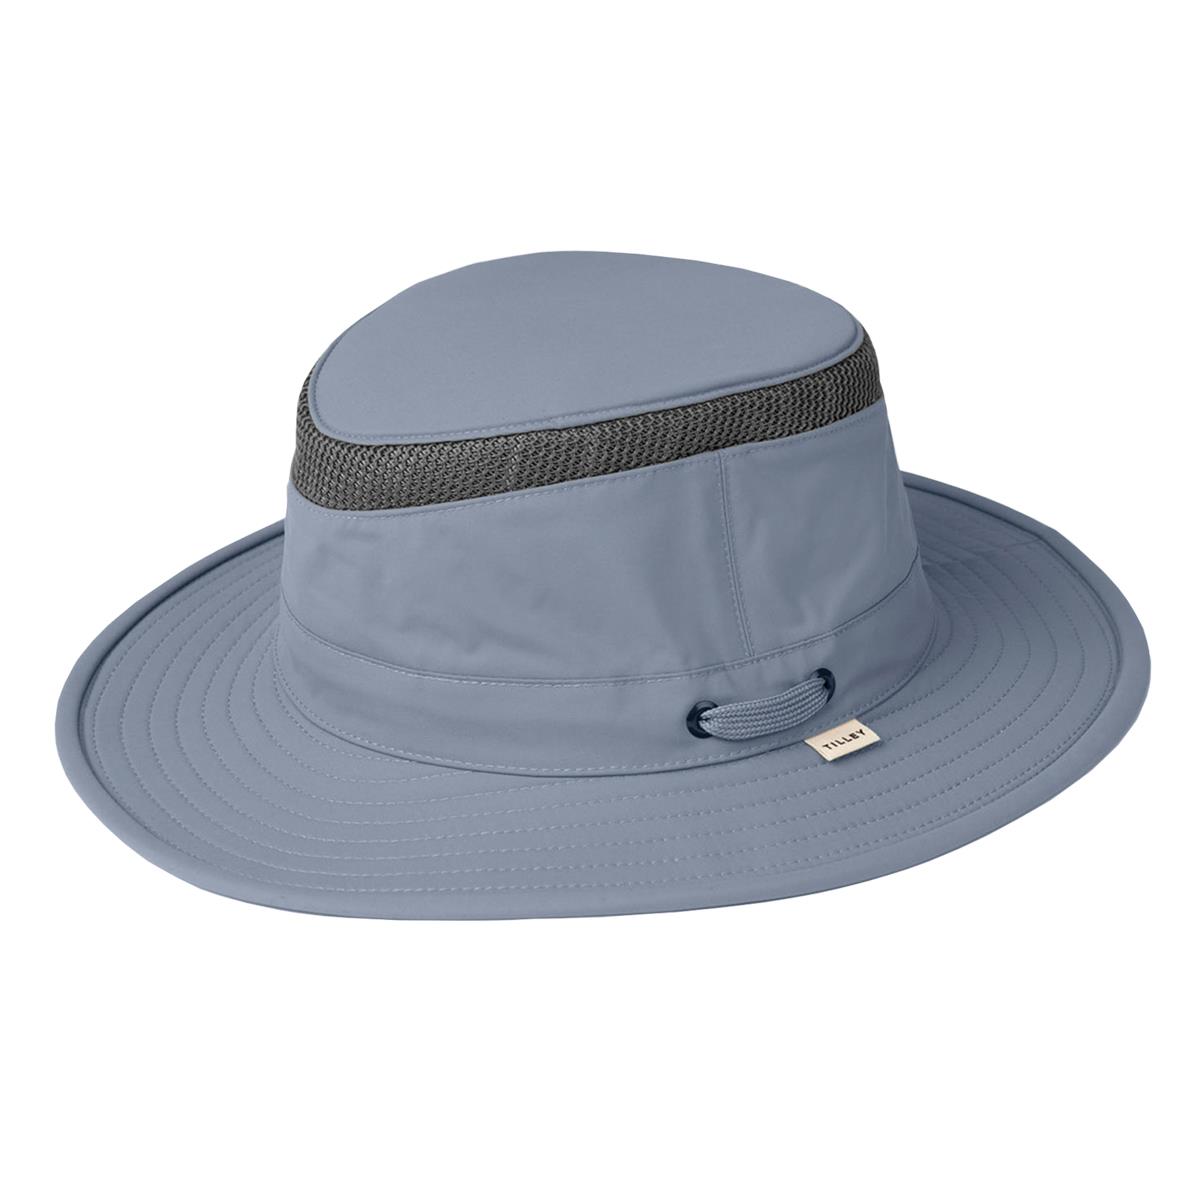 What is the cooling mechanism of the Tilley LTM5 hat?